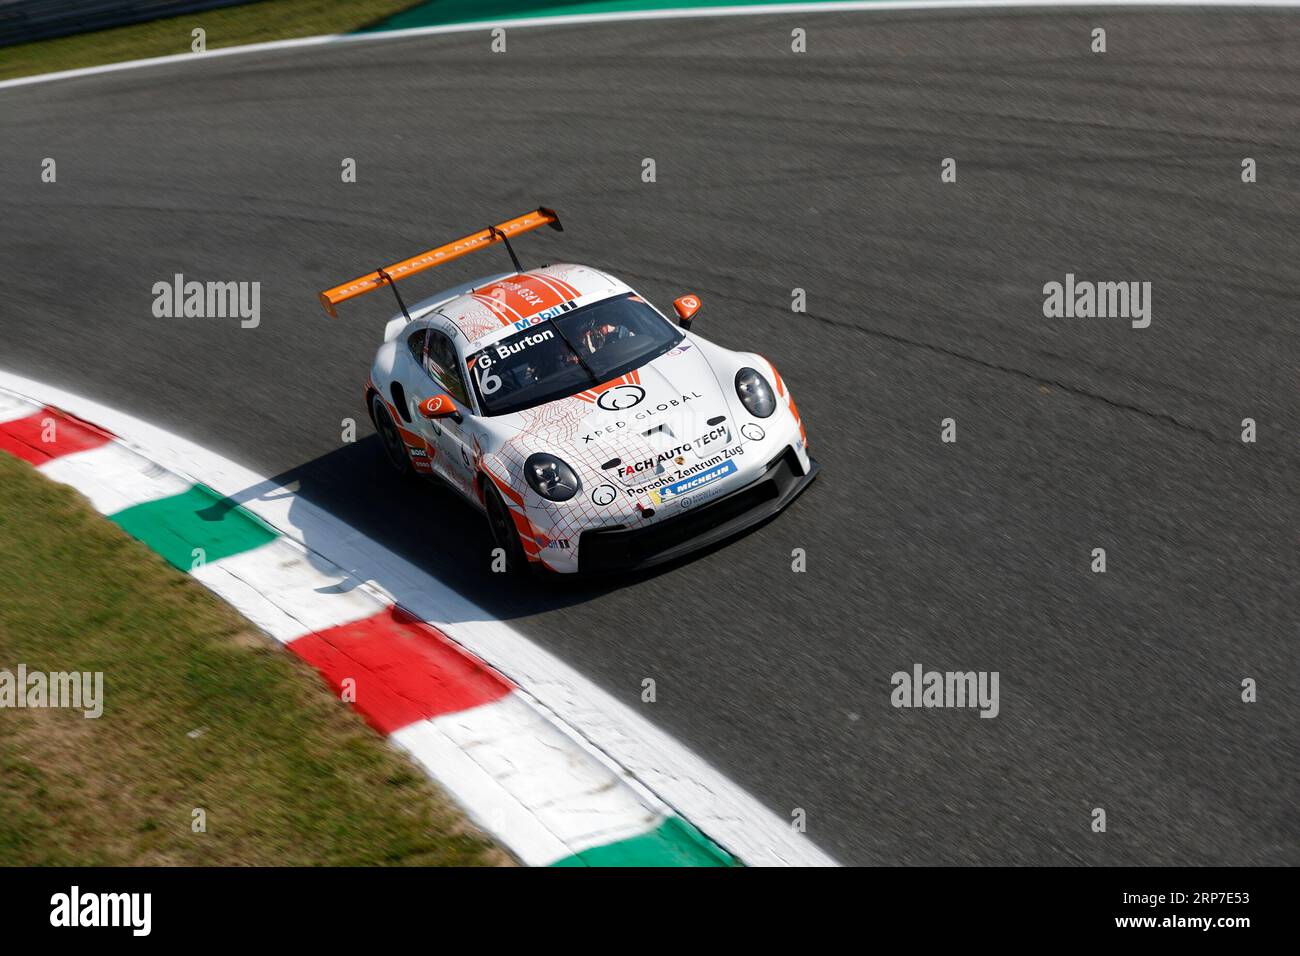 Monza, Italy. 2nd Sep, 2023. #6 Gustav Burton (UK, Fach Auto Tech), Porsche Mobil 1 Supercup at Autodromo Nazionale Monza on September 2, 2023 in Monza, Italy. (Photo by HIGH TWO) Credit: dpa/Alamy Live News Stock Photo